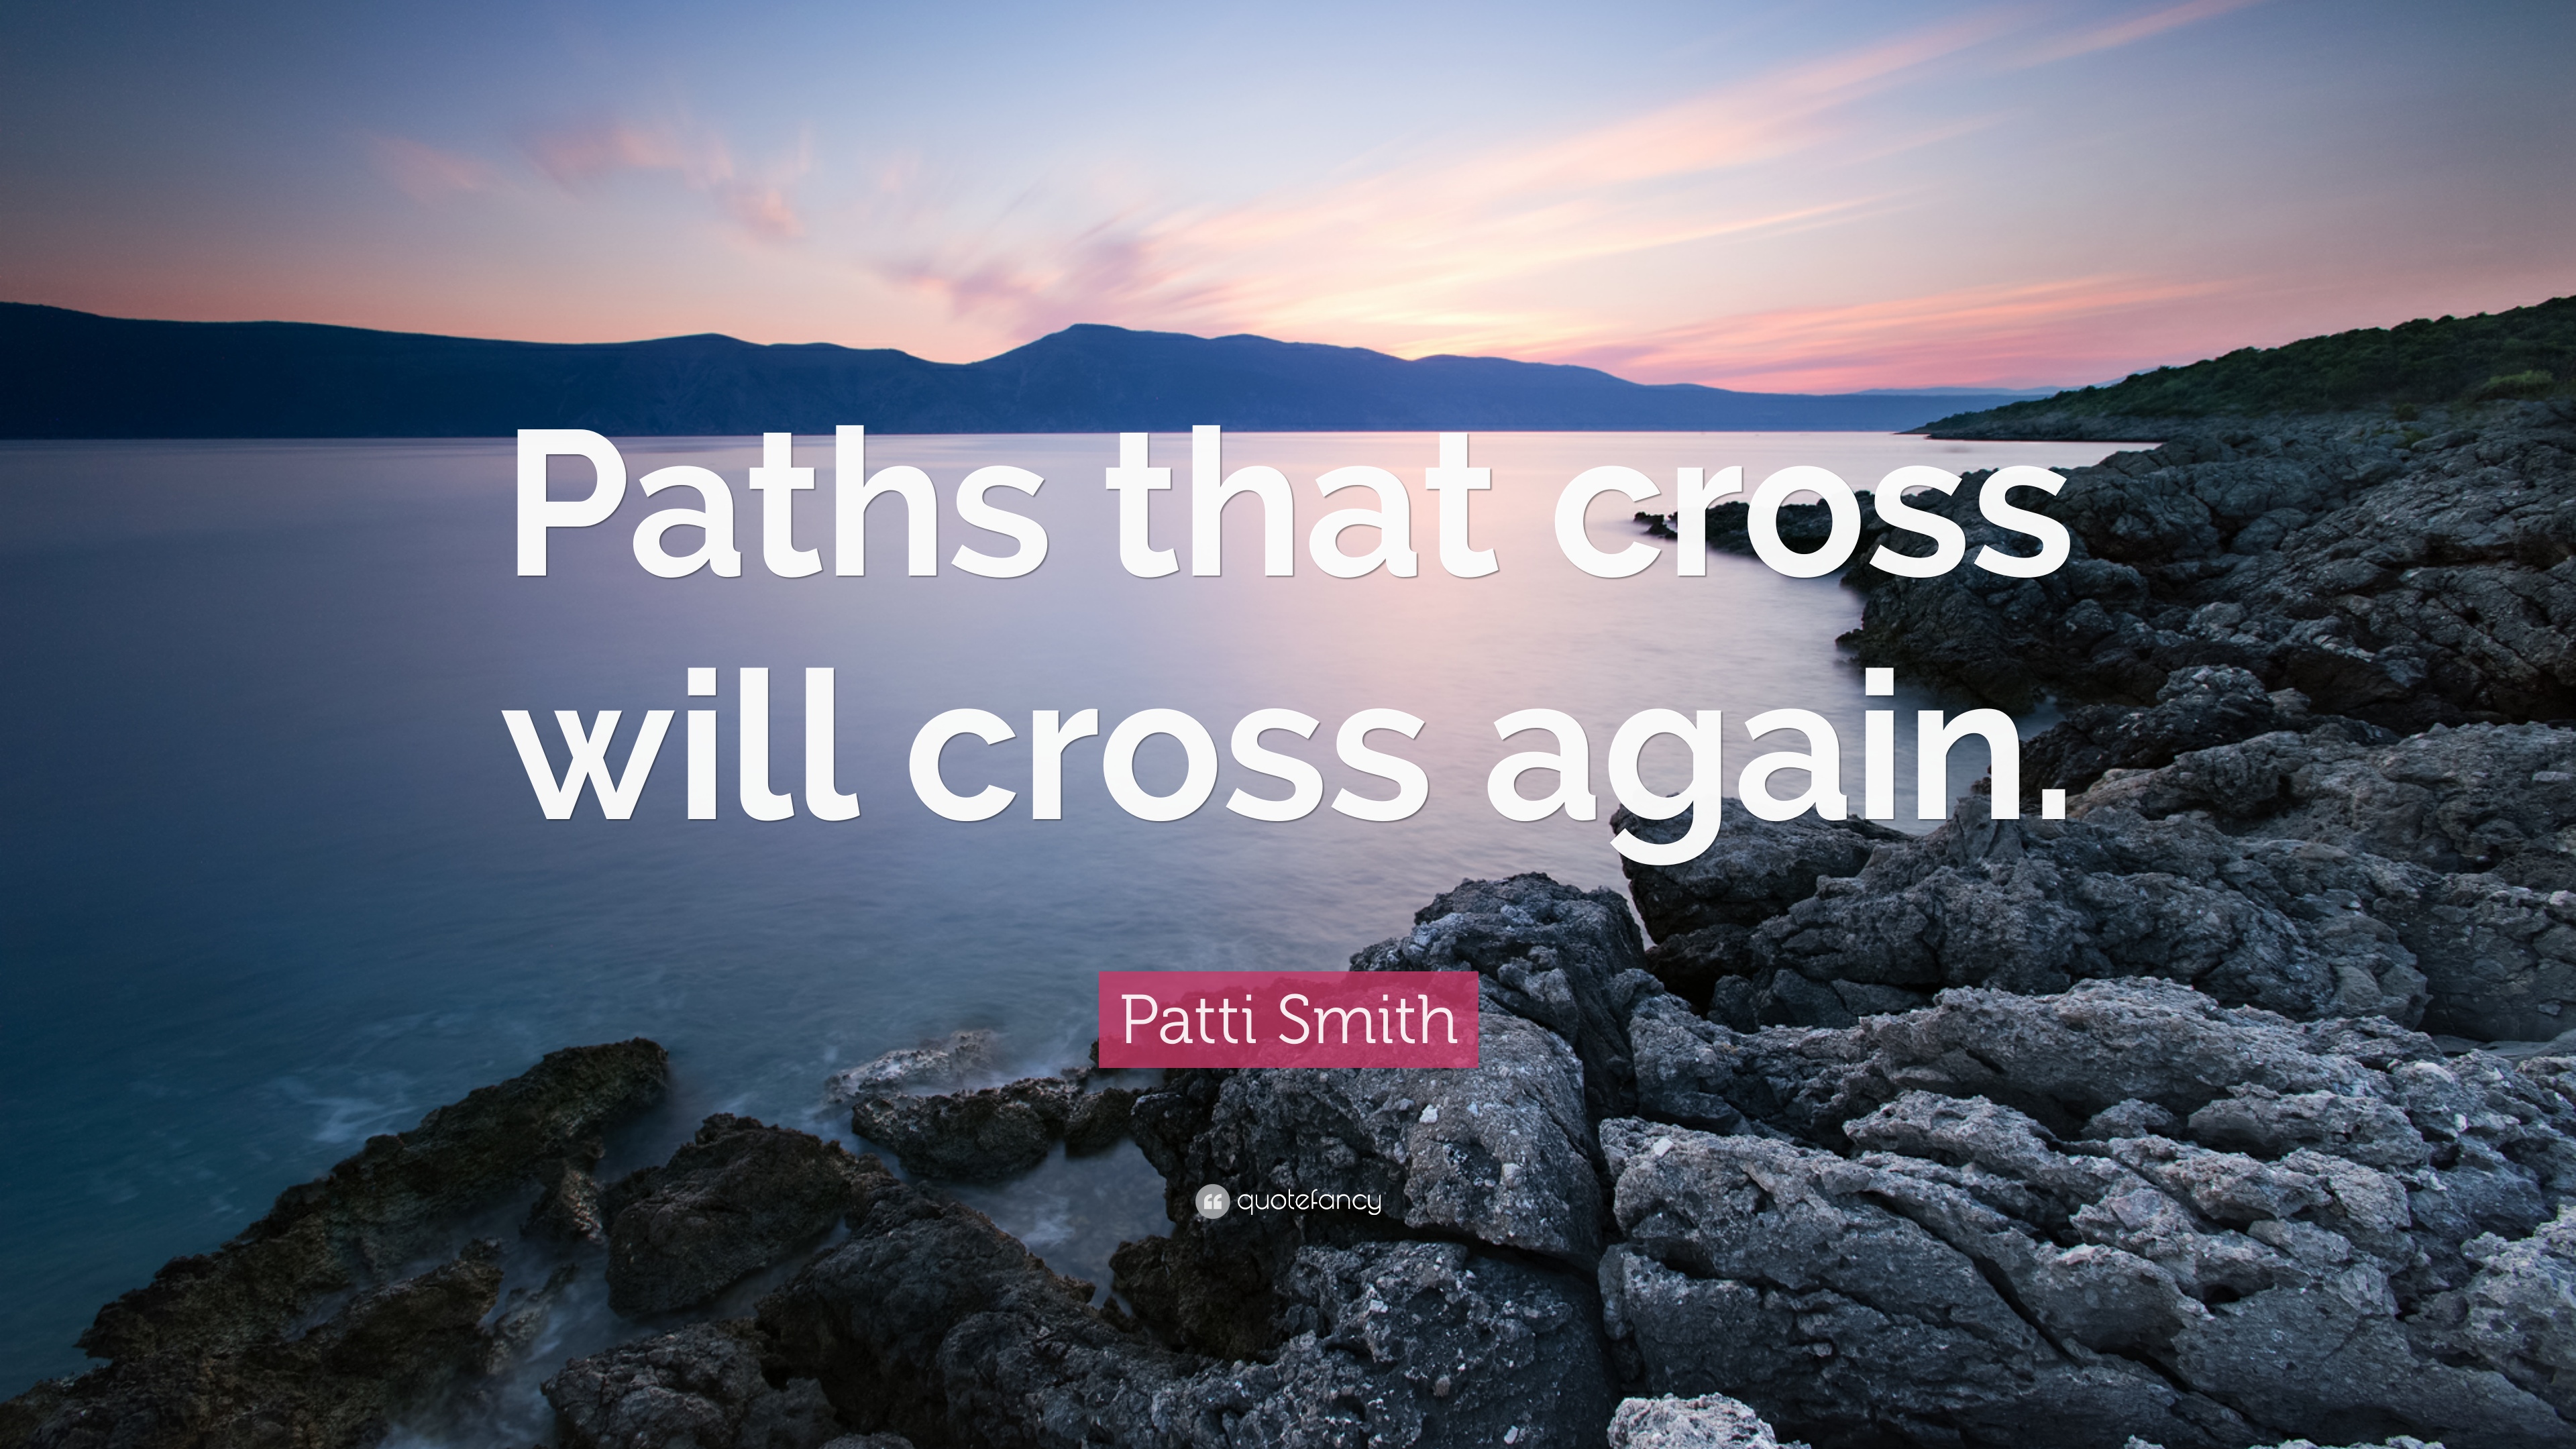 39 Best Quotes About Crossing Paths